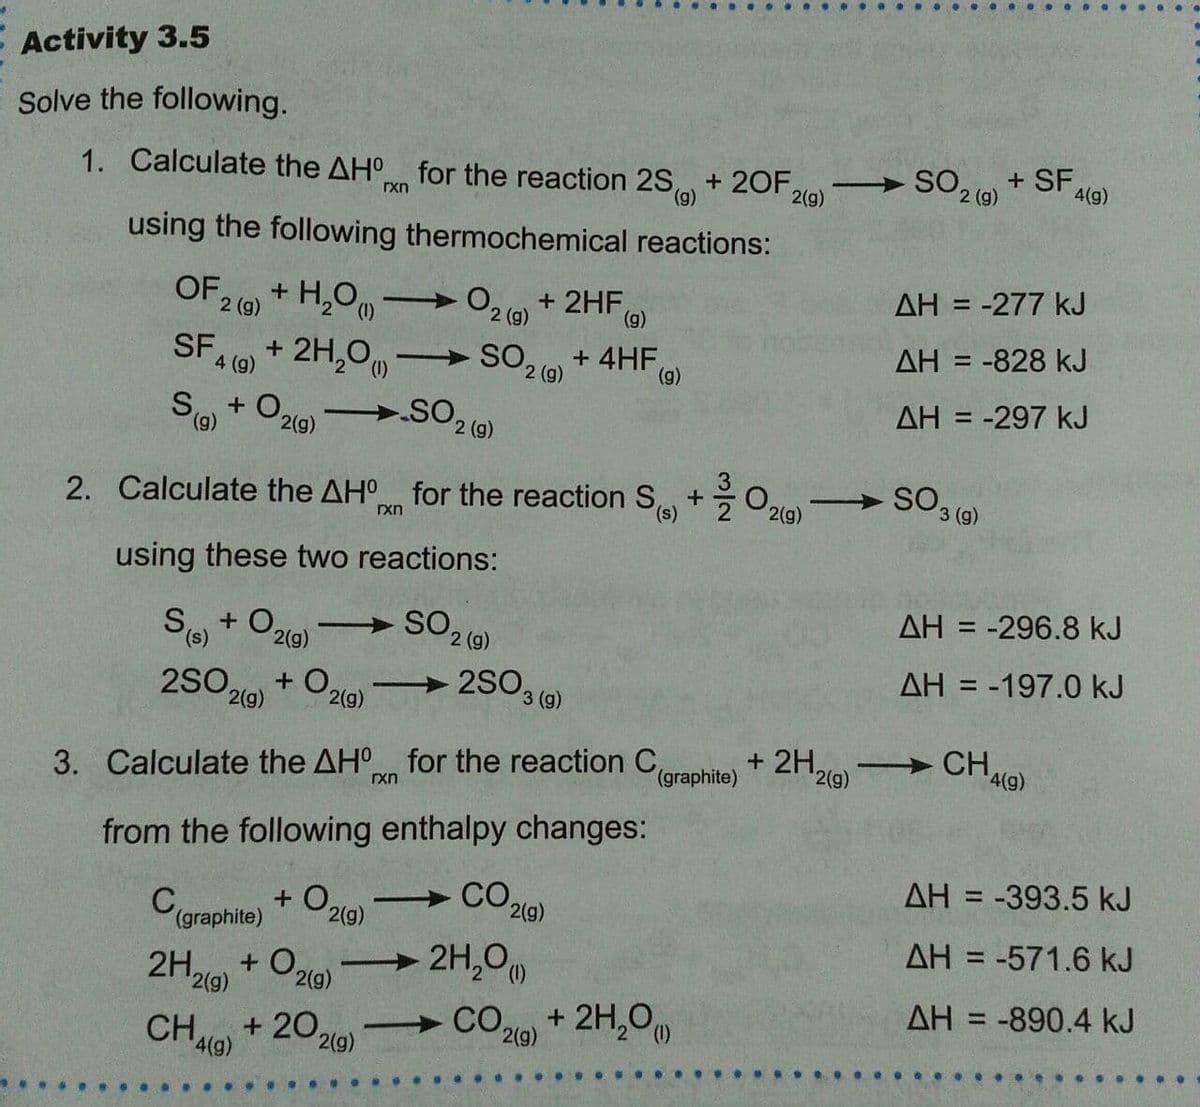 - Activity 3.5
Solve the following.
1. Calculate the AH for the reaction 2S)
+ 20F,
2(g)
2 (g)
4(g)
rxn
using the following thermochemical reactions:
AH = -277 kJ
+ H,Om
2 (g)
%3D
OF,
O2 (9)
+ 2HF,
(g)
AH = -828 kJ
+ 2H,0
So + O29) SO2 ()
SF
+ 4HF (g)
2 (g)
4 (g)
AH = -297 kJ
(6),
2(g)
2. Calculate the AH for the reaction S +O2l0)
SO3 (9)
rxn
using these two reactions:
AH = -296.8 kJ
%3D
+ O,
2(9)
AH = -197.0 kJ
%3D
2SO,
2(g)
+ O,
2(g)
2S03 (9)
-
+ 2H,
2(g)
CHA@)
3. Calculate the AH for the reaction C,
(graphite)
rxn
from the following enthalpy changes:
AH = -393.5 kJ
+ O219)
(graphite)
AH = -571.6 kJ
2H,0
CO,
2H,
+ O,
2(g)
2(g)
AH = -890.4 kJ
%3D
+ 2H,0
+ 20,
CHA9)
2(g)
2(g)
4(g)
...
